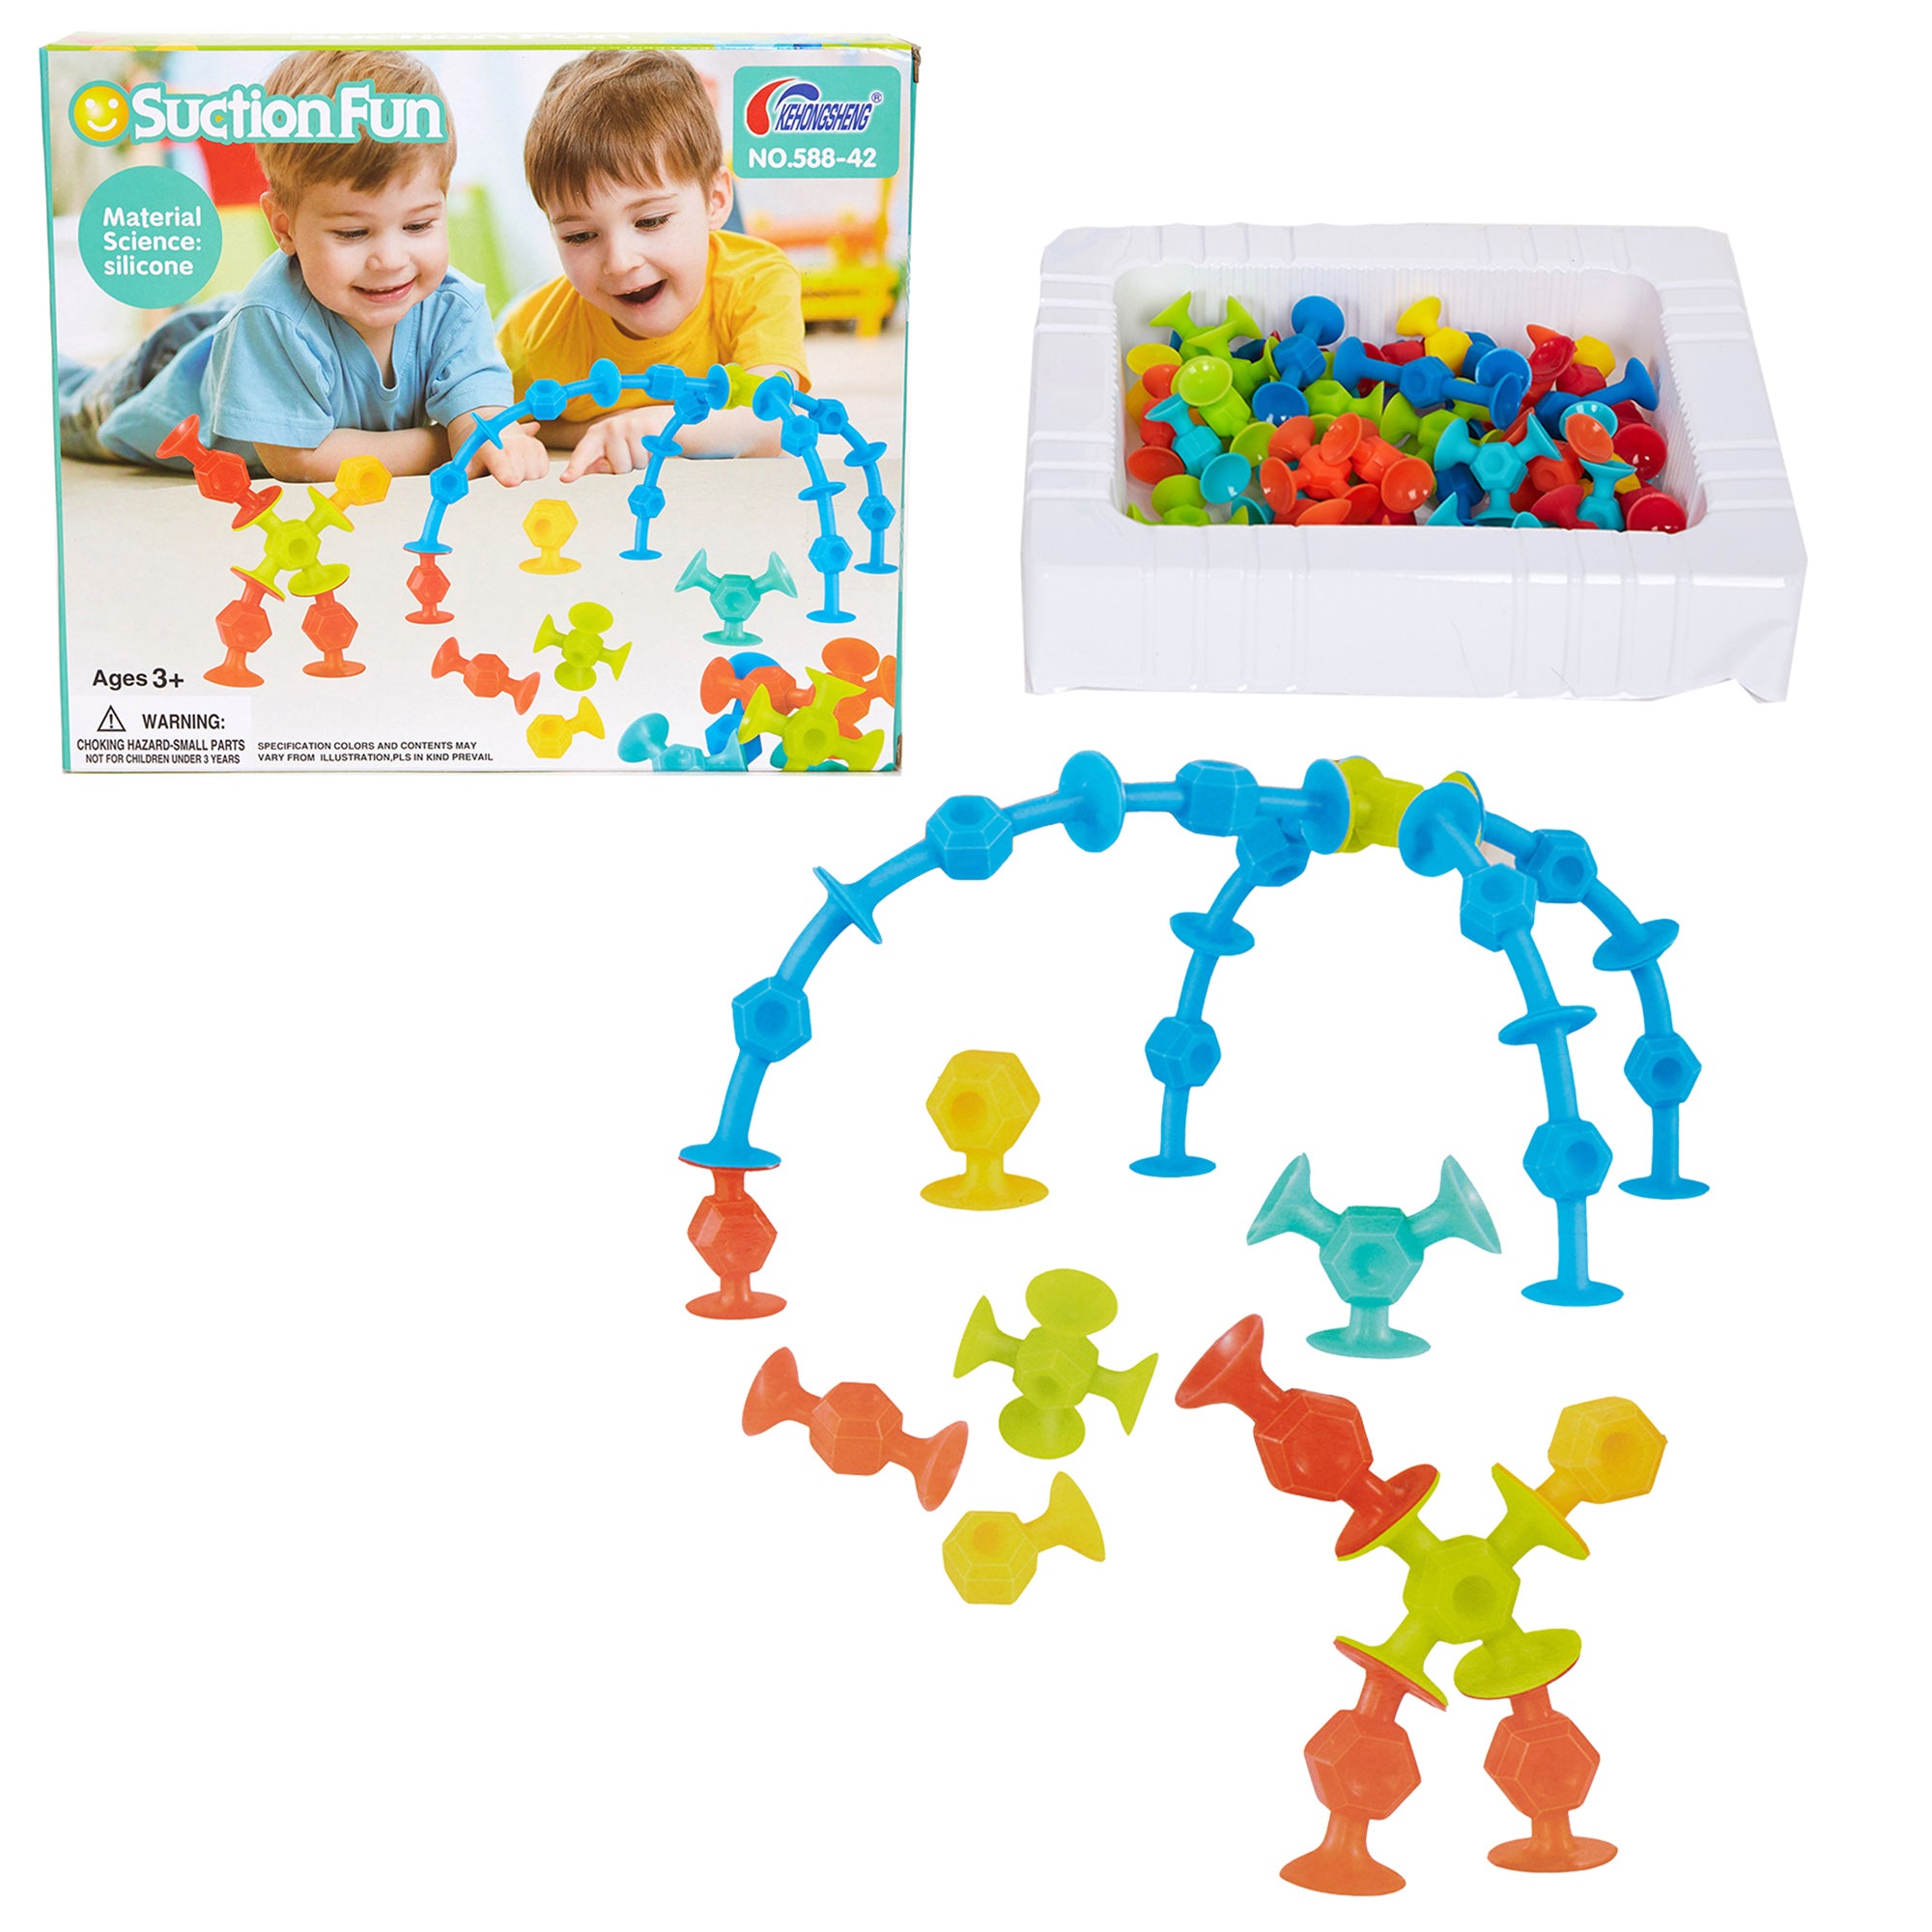 Bosonshop Baby Building Blocks Colorful Security Silicone Building Toy